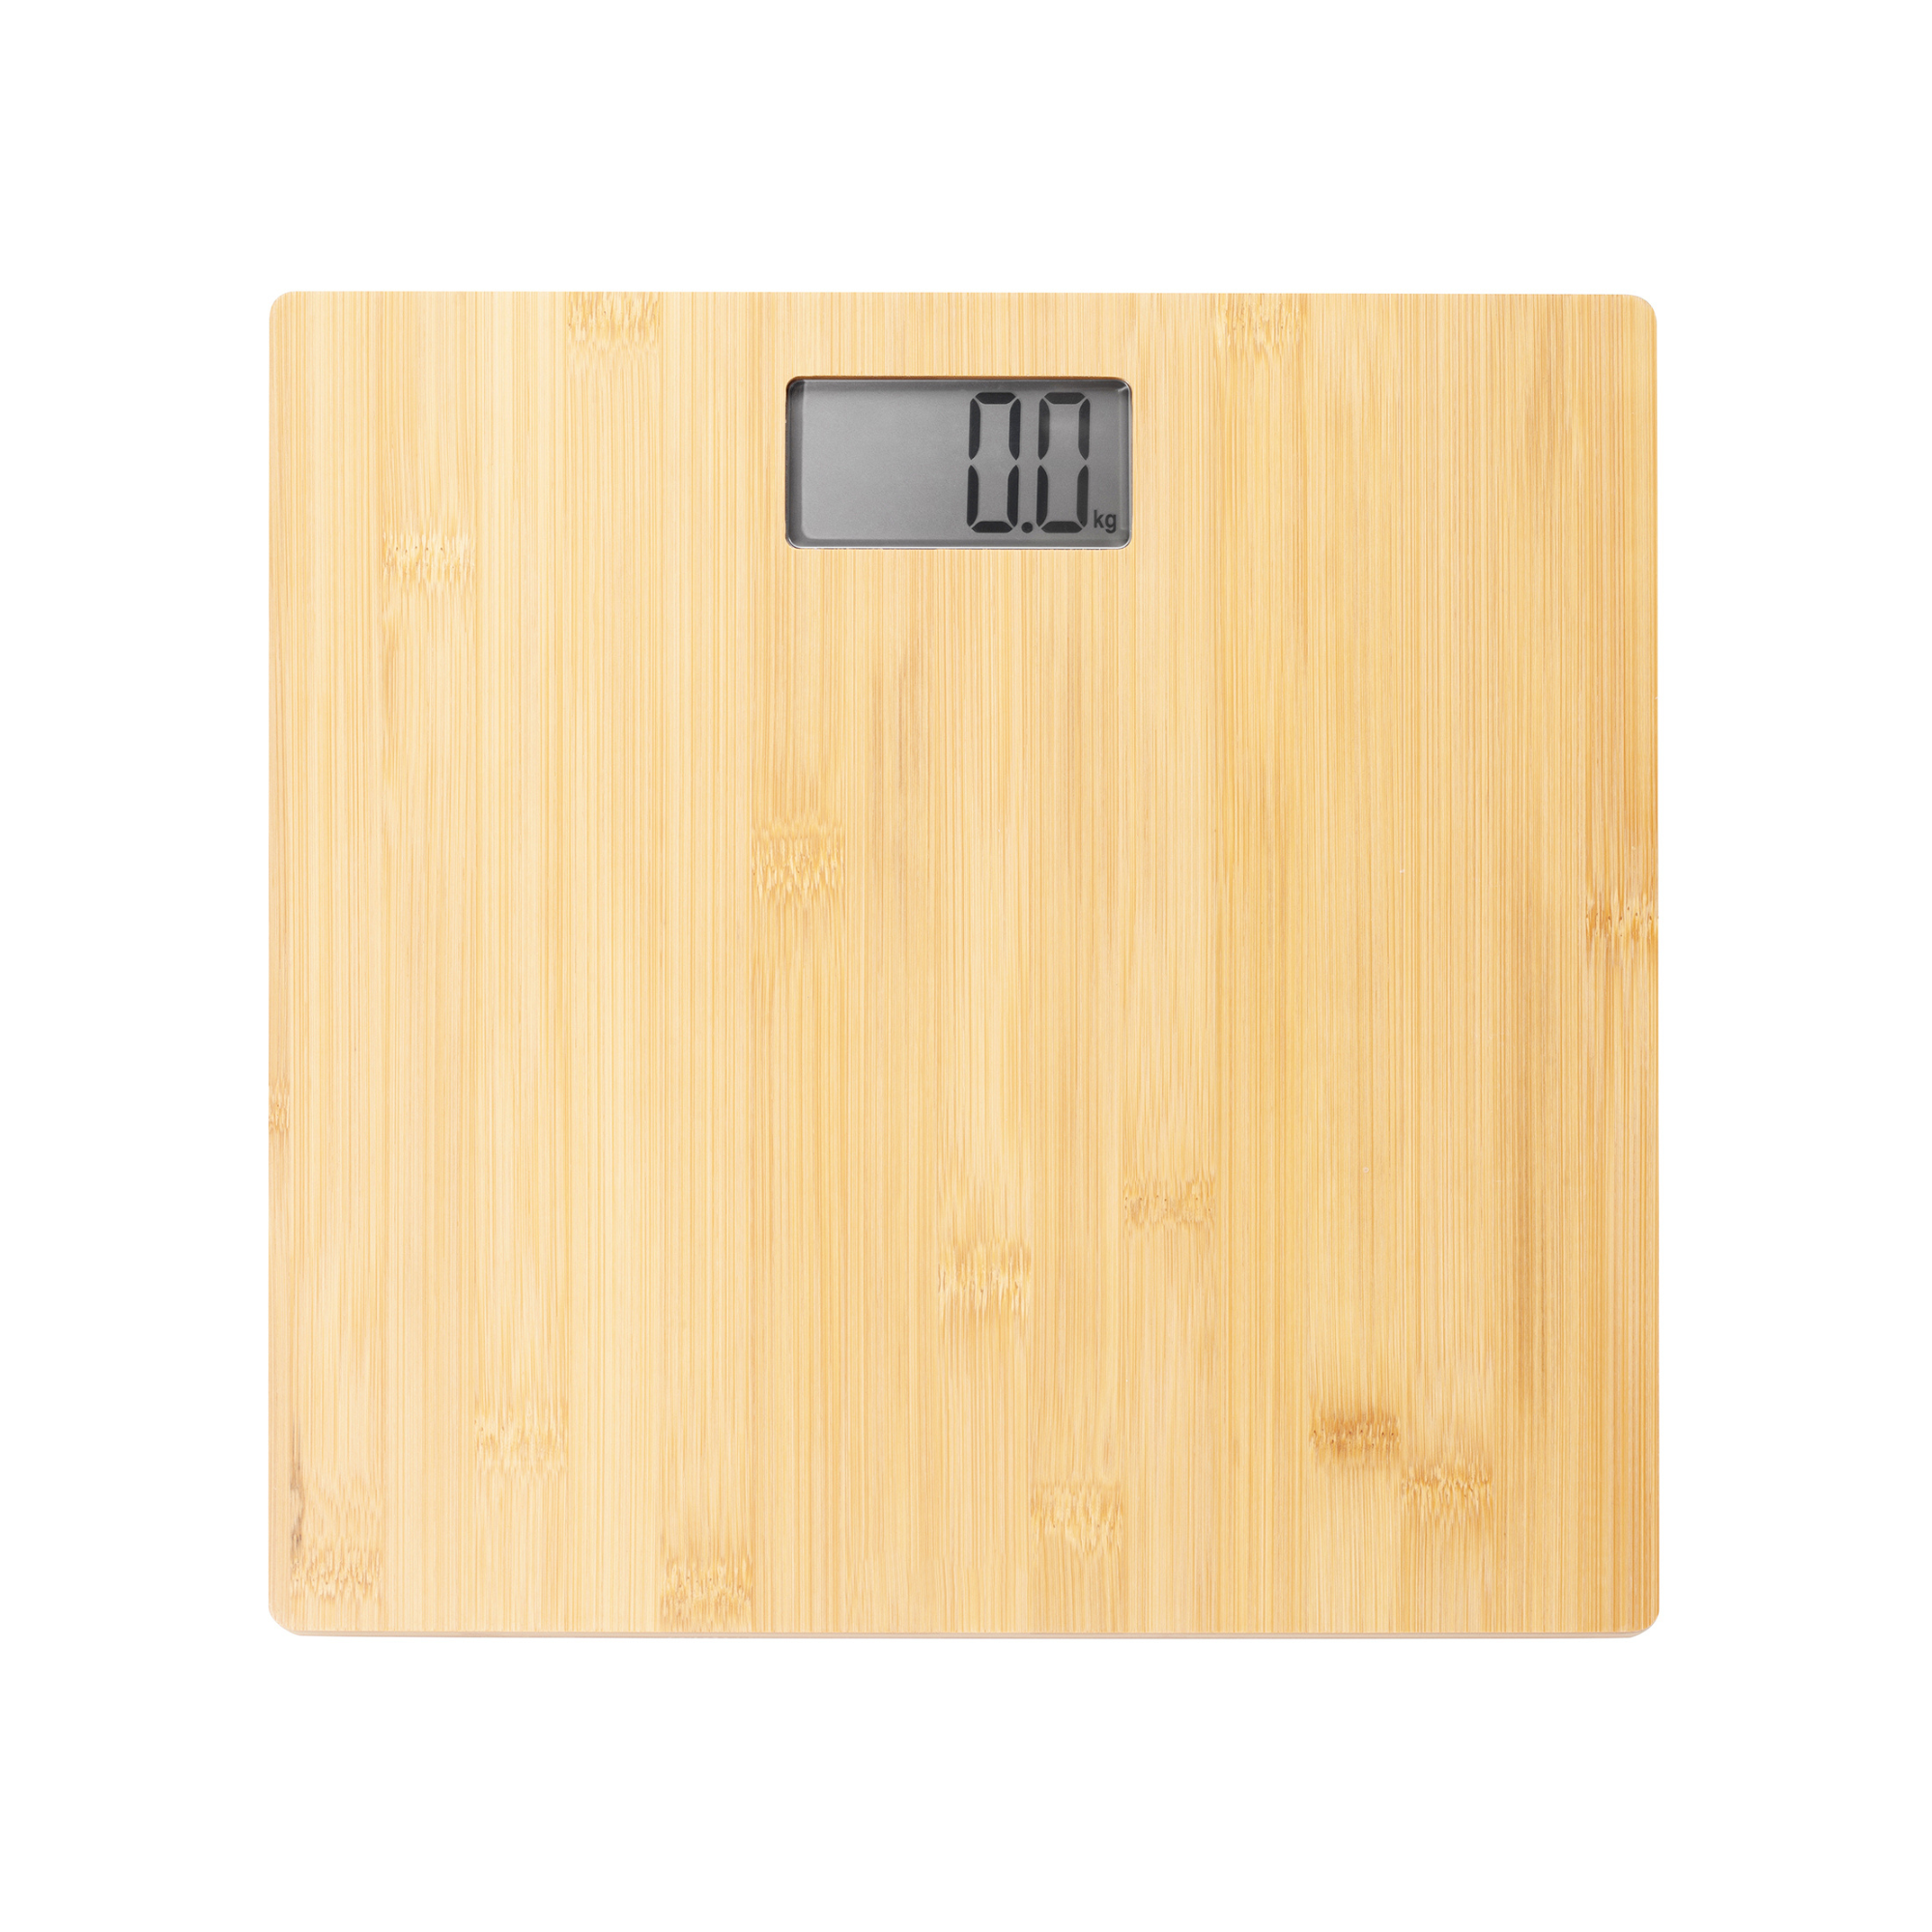 Poplar Home Products Digital Bathroom Scales for Accurate Body Weight – Ultra Thin, Bamboo Scale – Auto Step on Design – 4 Precision Weight Sensors